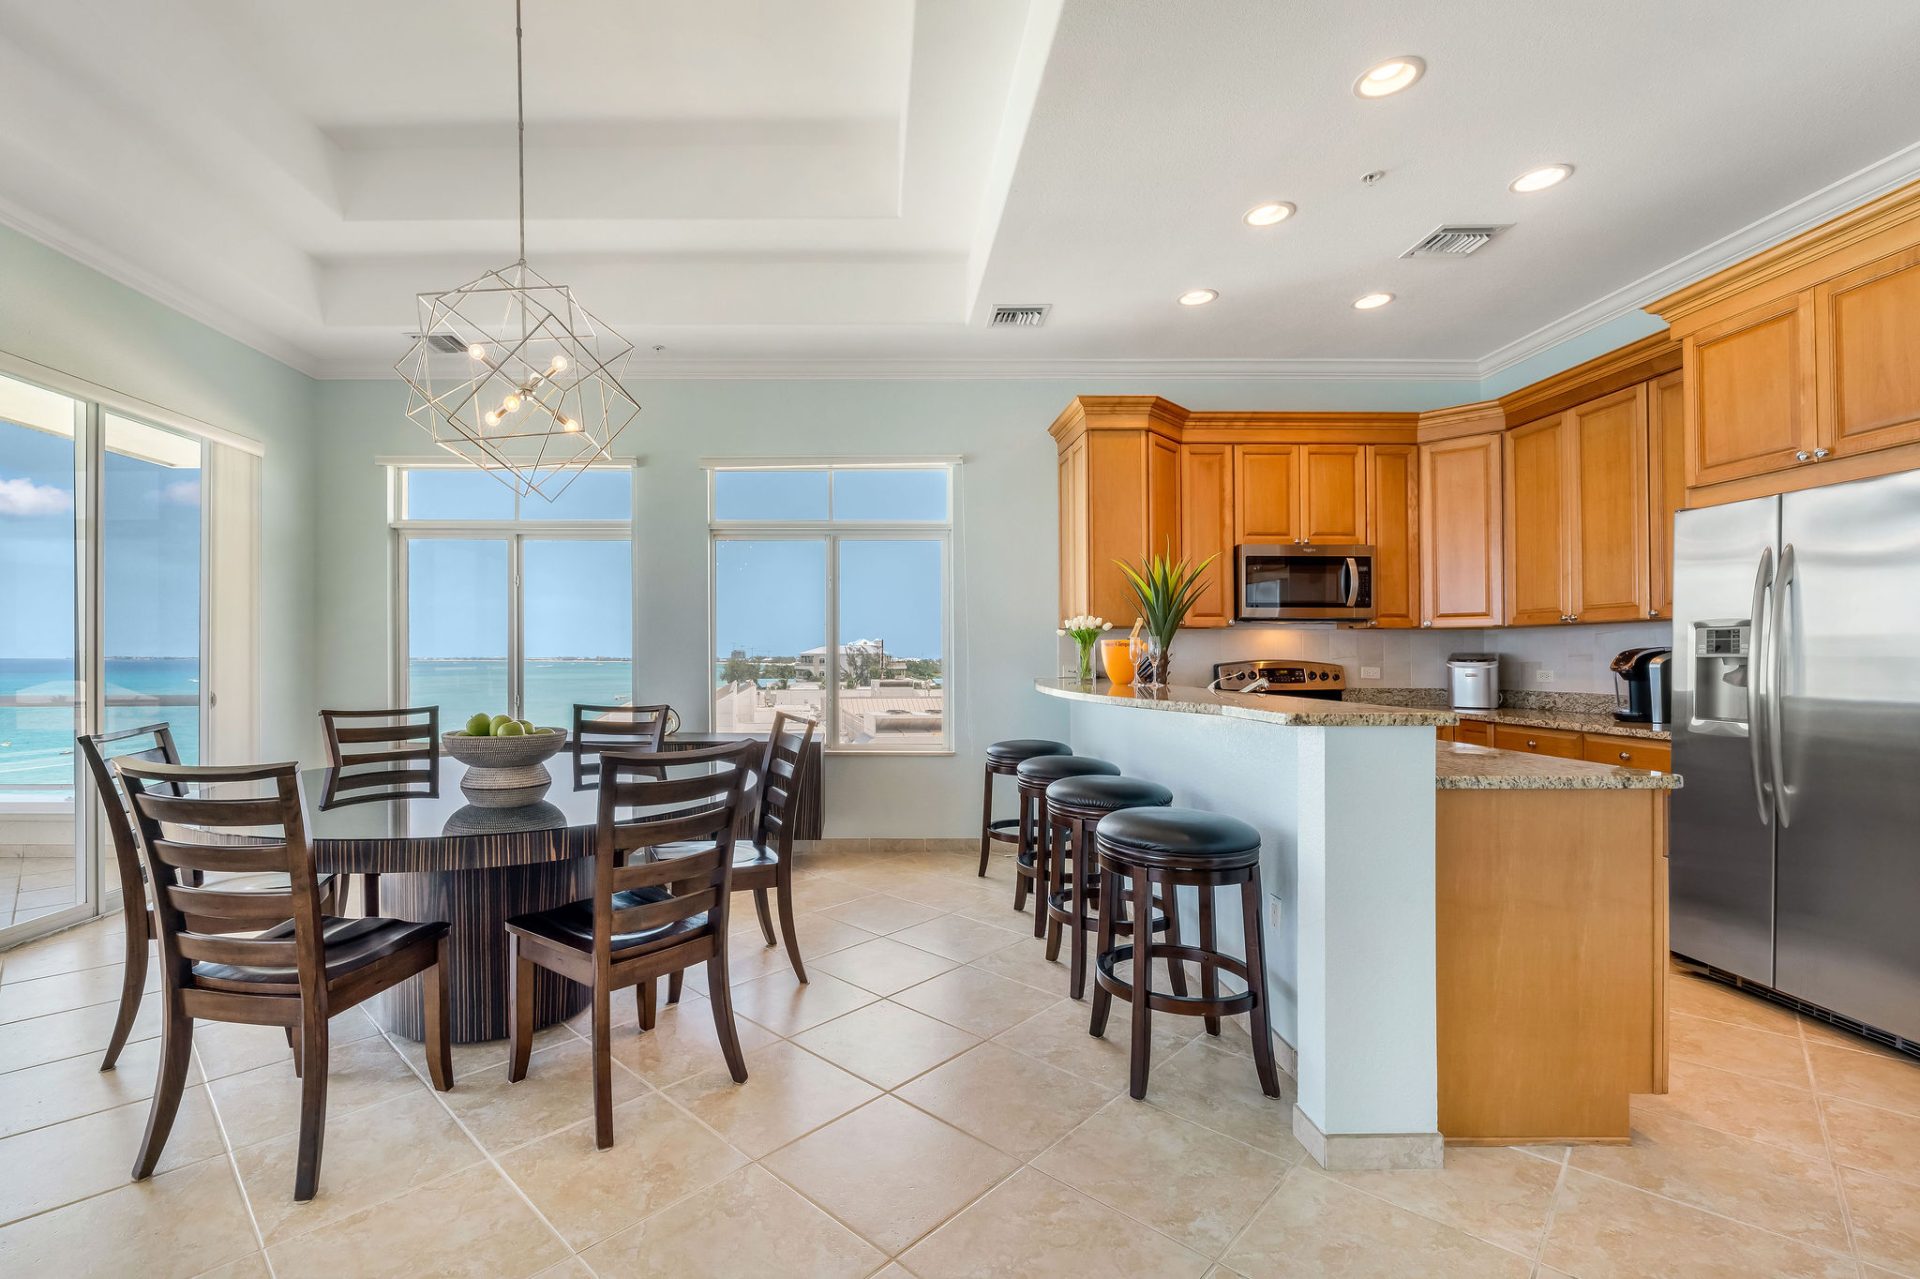 South Bay Beach Club Penthouse kitchen and dining area